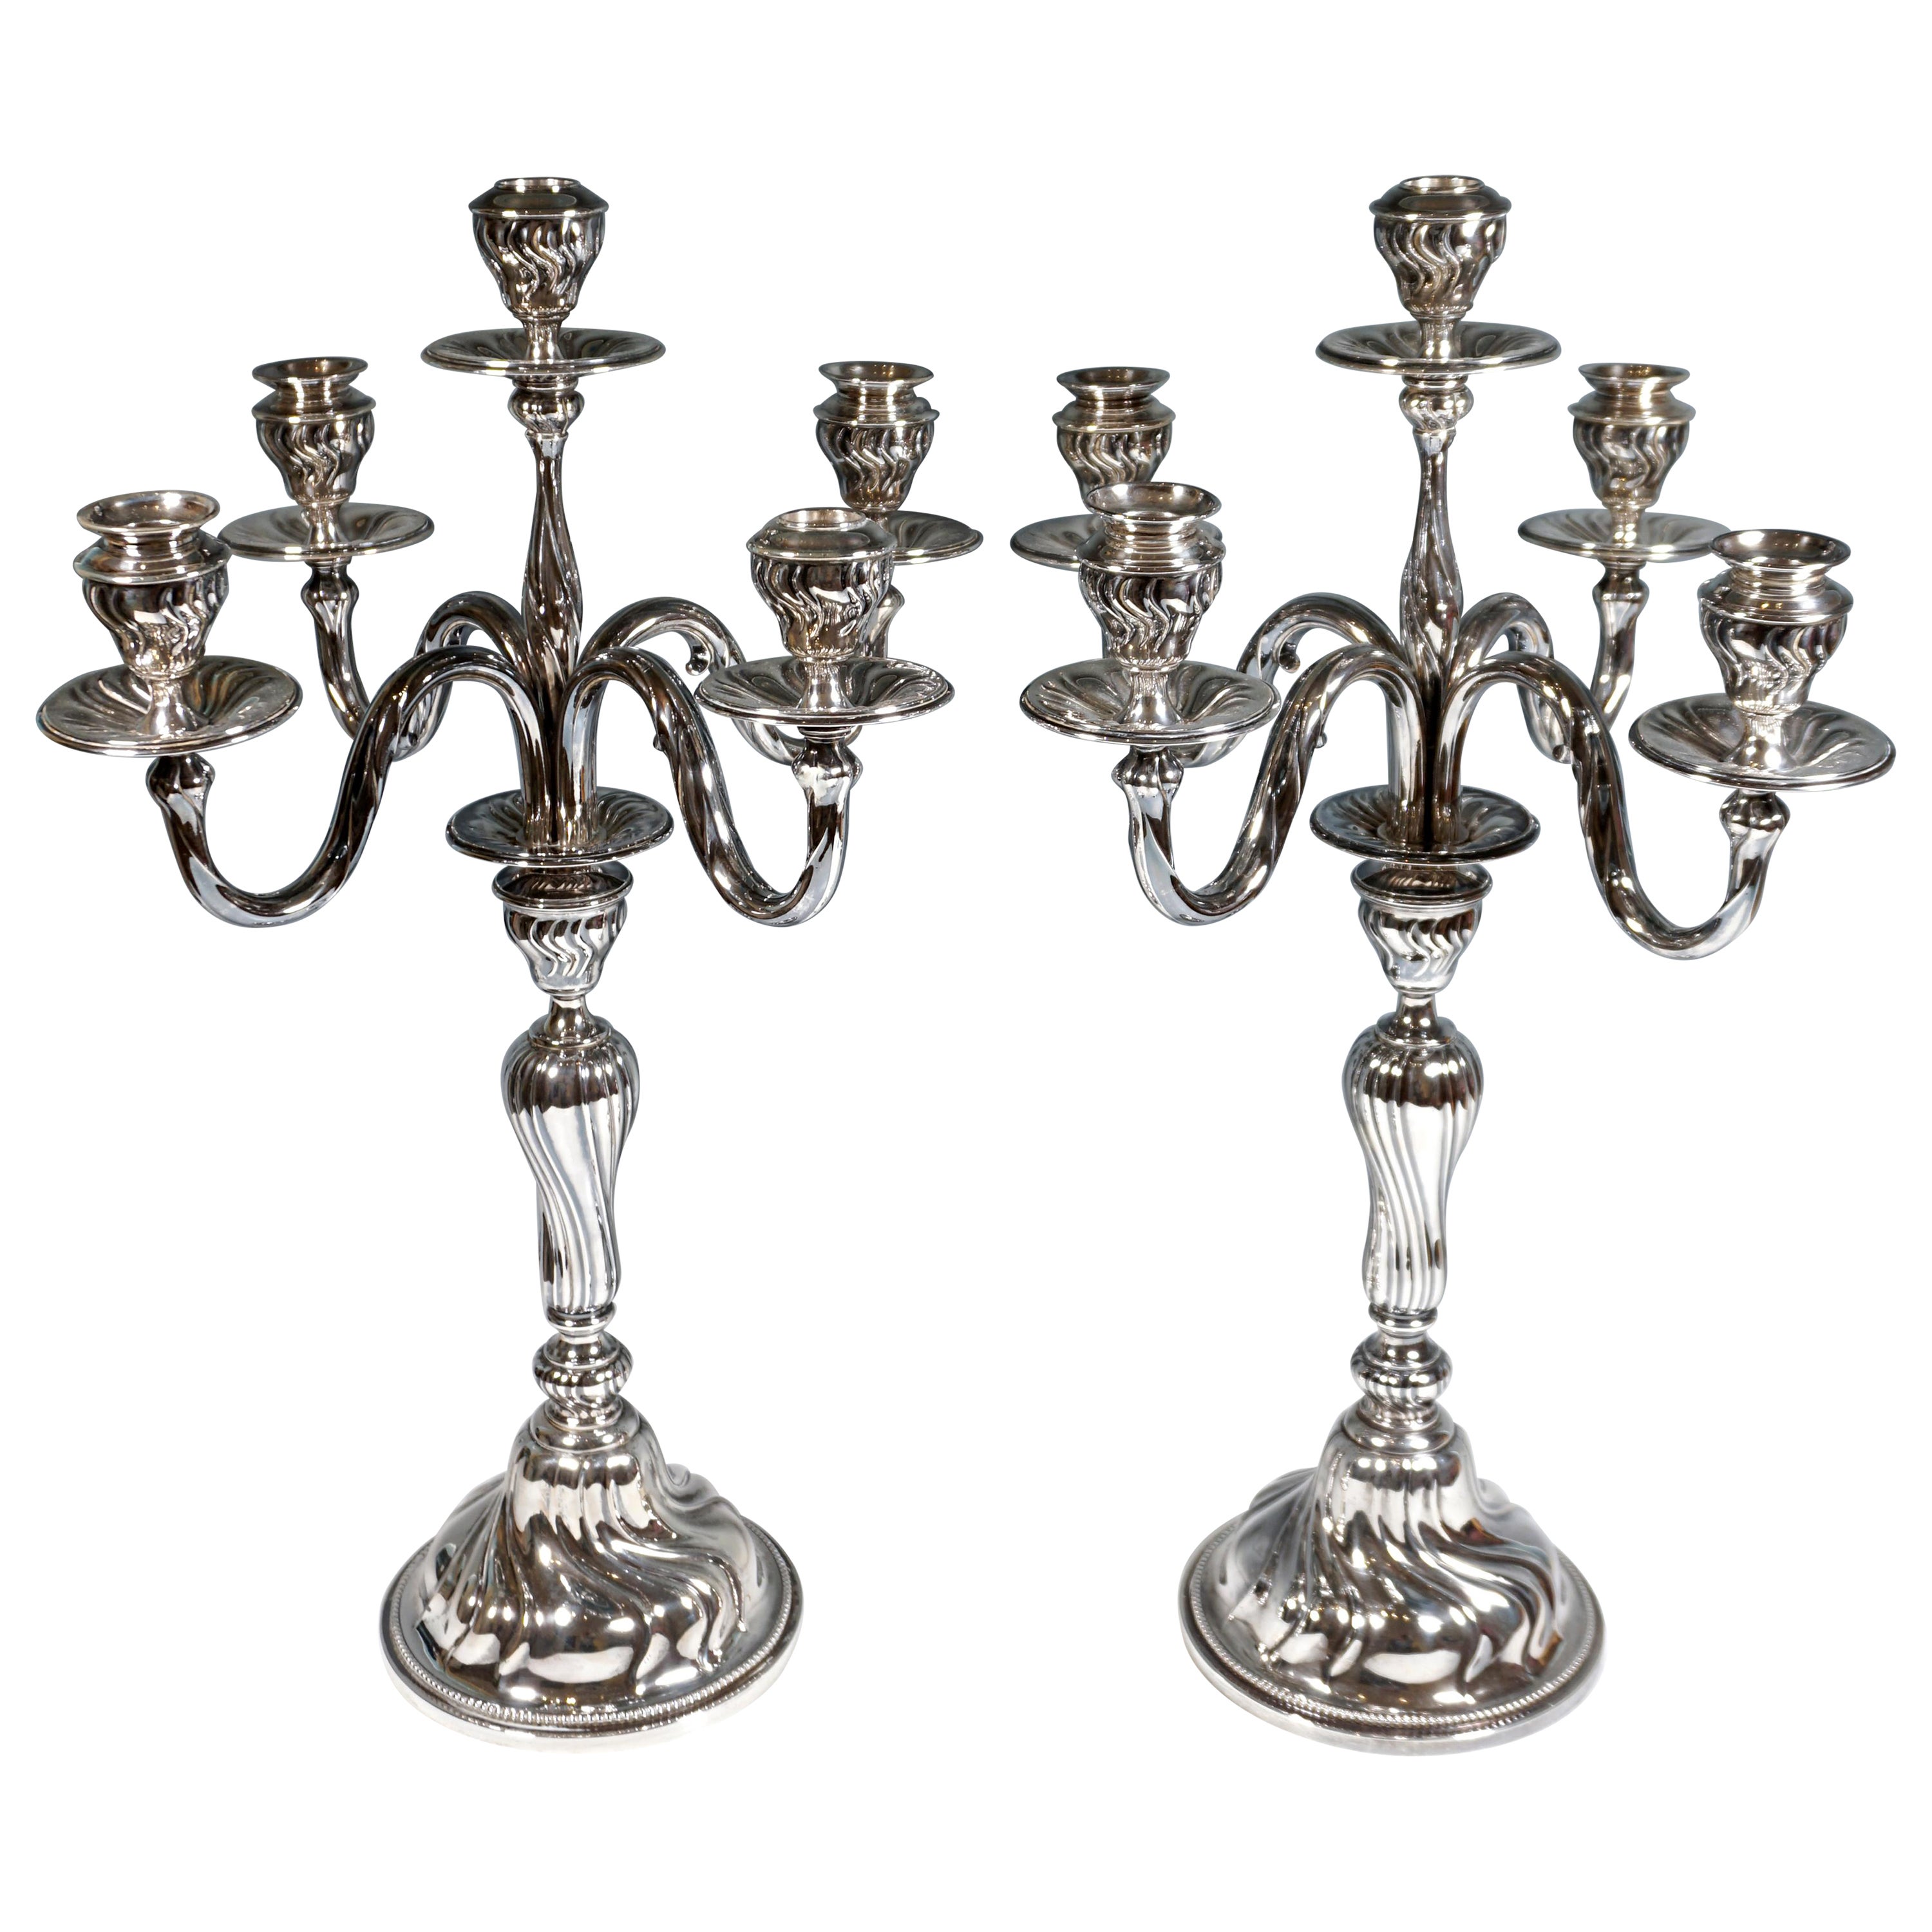 Pair of Baroque Style 5-Flame Silver Splendour Candelabras, Early 20th Century